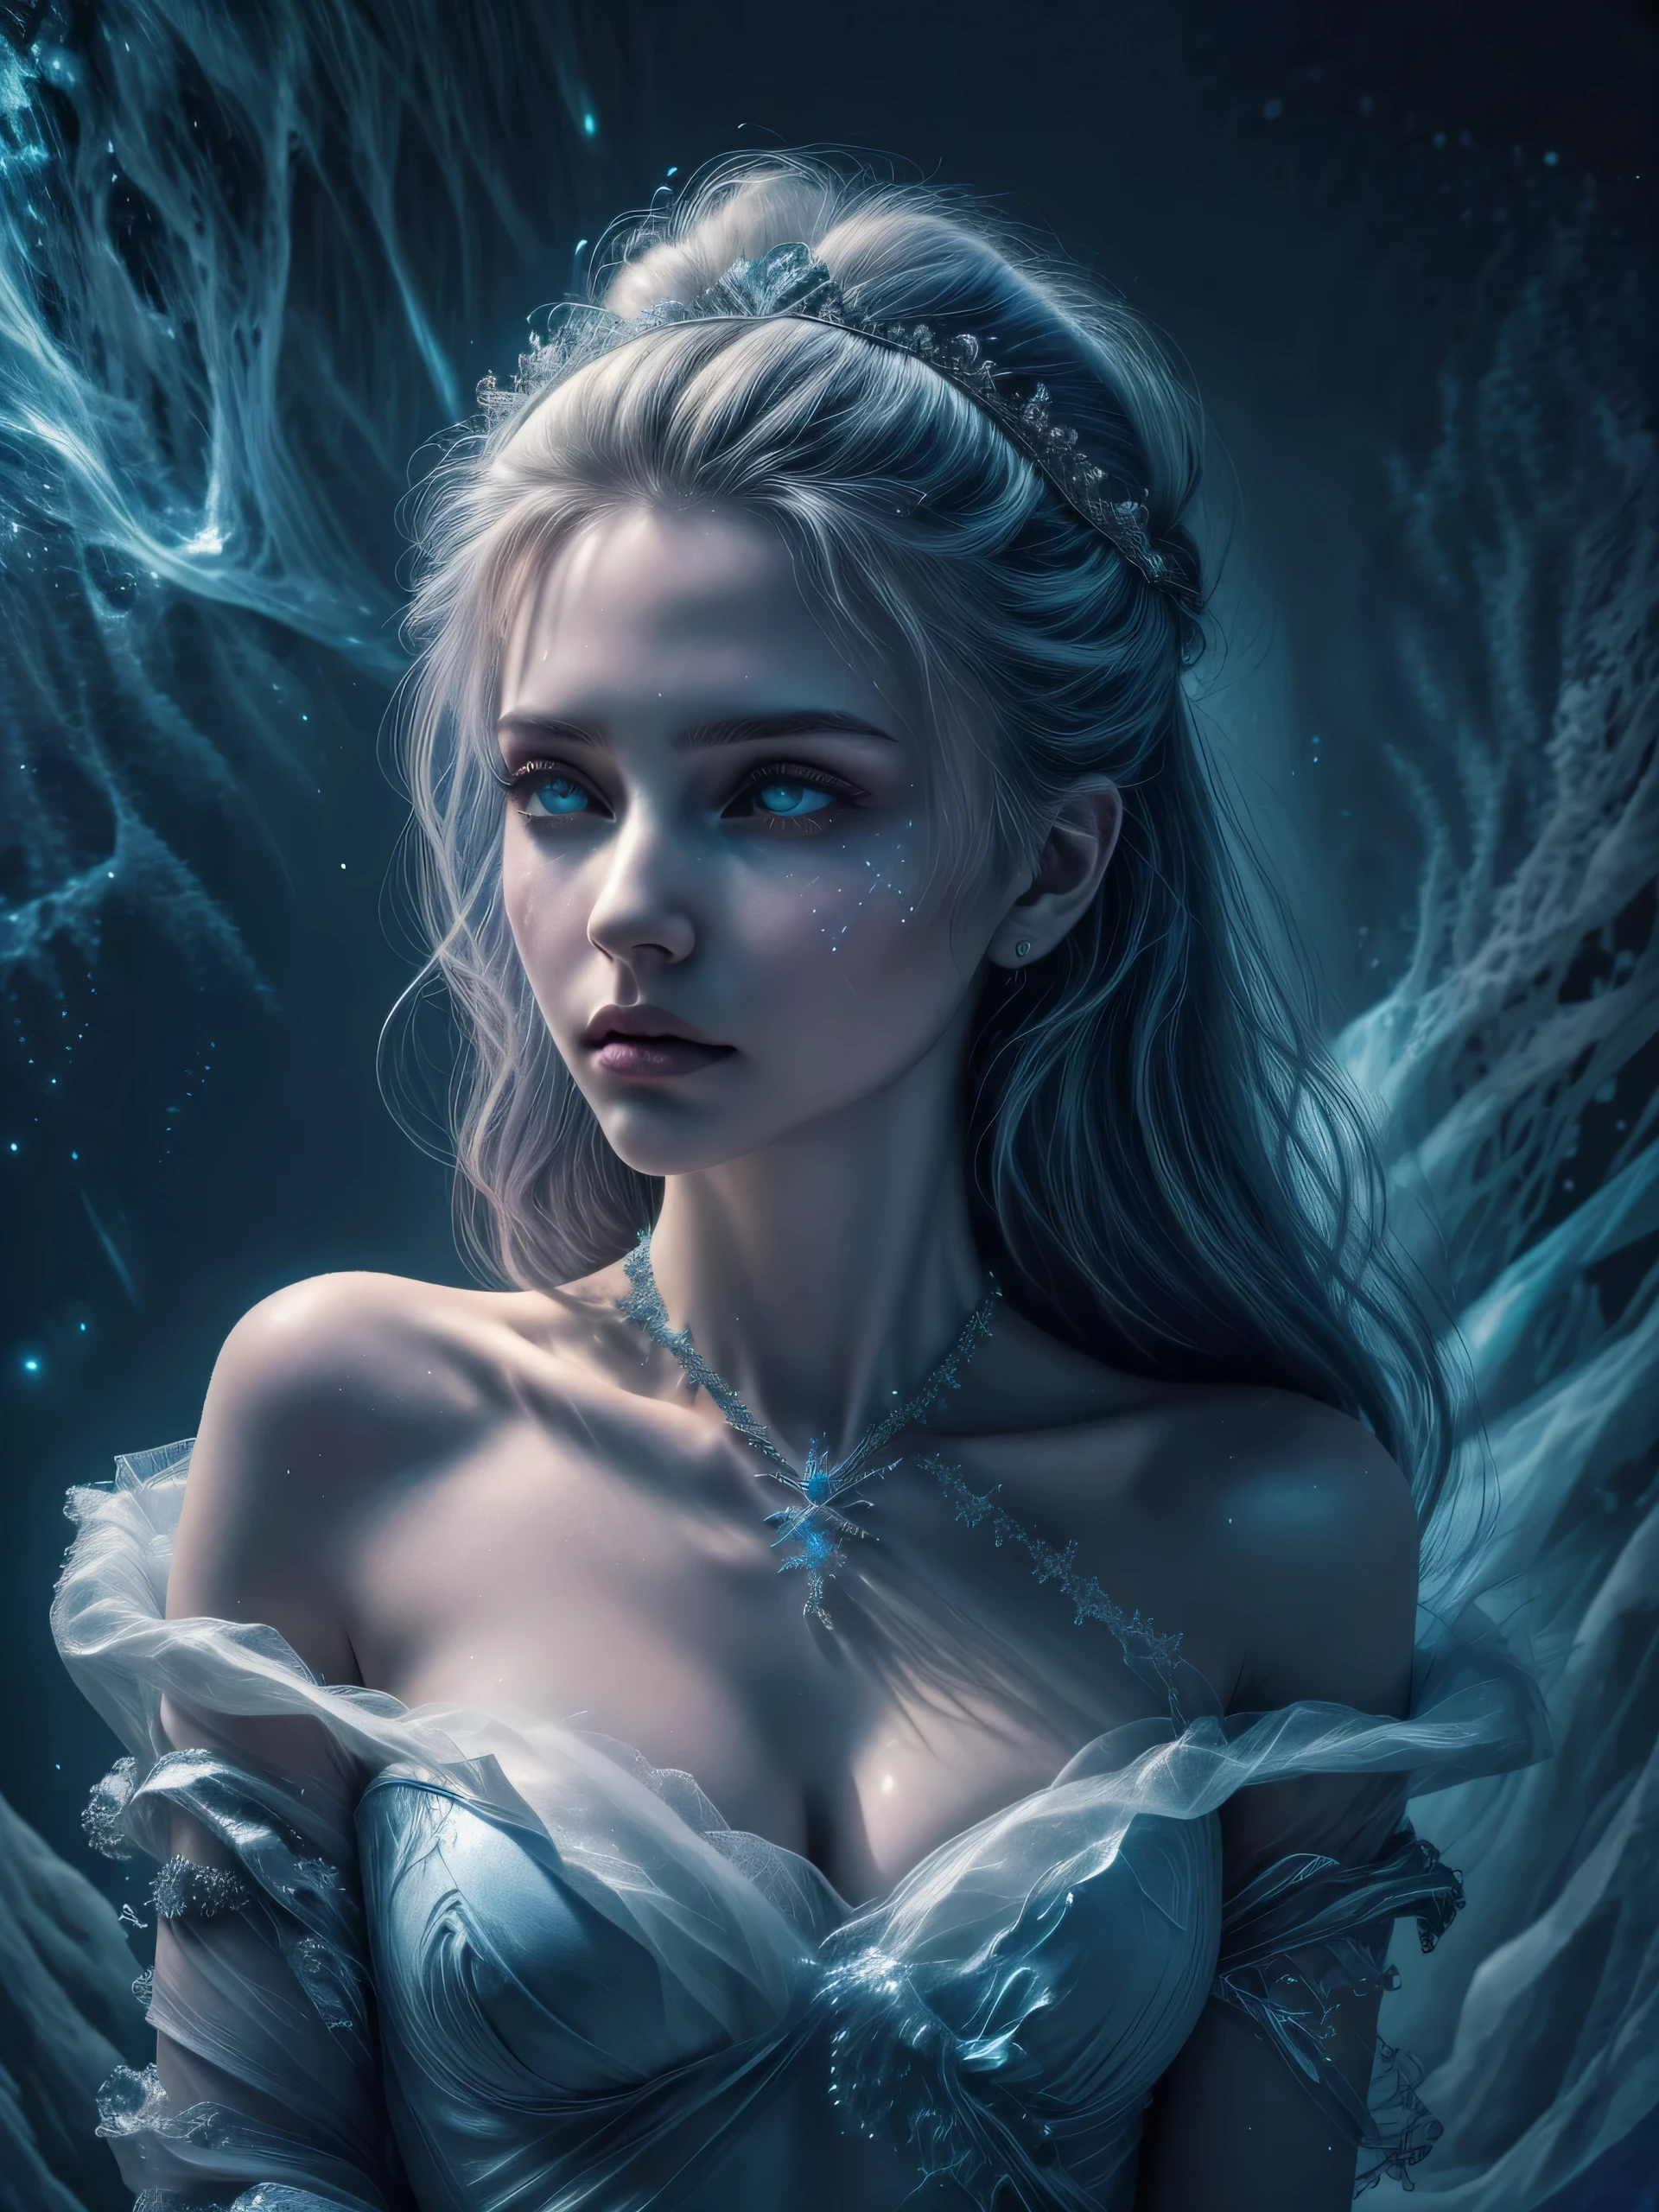 (Masterpiece, best quality, highres:1.3), 3D model, render at best quality, from side, close-up, upper body, 1 goddess, queen of coldest ice, from epic fantasy game, feminine appearance, cleavage, detailed hair strands, delicate face, glowing blue eyes, cold gaze, fully dressed in noble sheer dress with ice effect, ice tiara, casting spell posture, immense blizzard storm, snow storm, ice spell, ice shard, frozen realm, ((surrealistic detail))